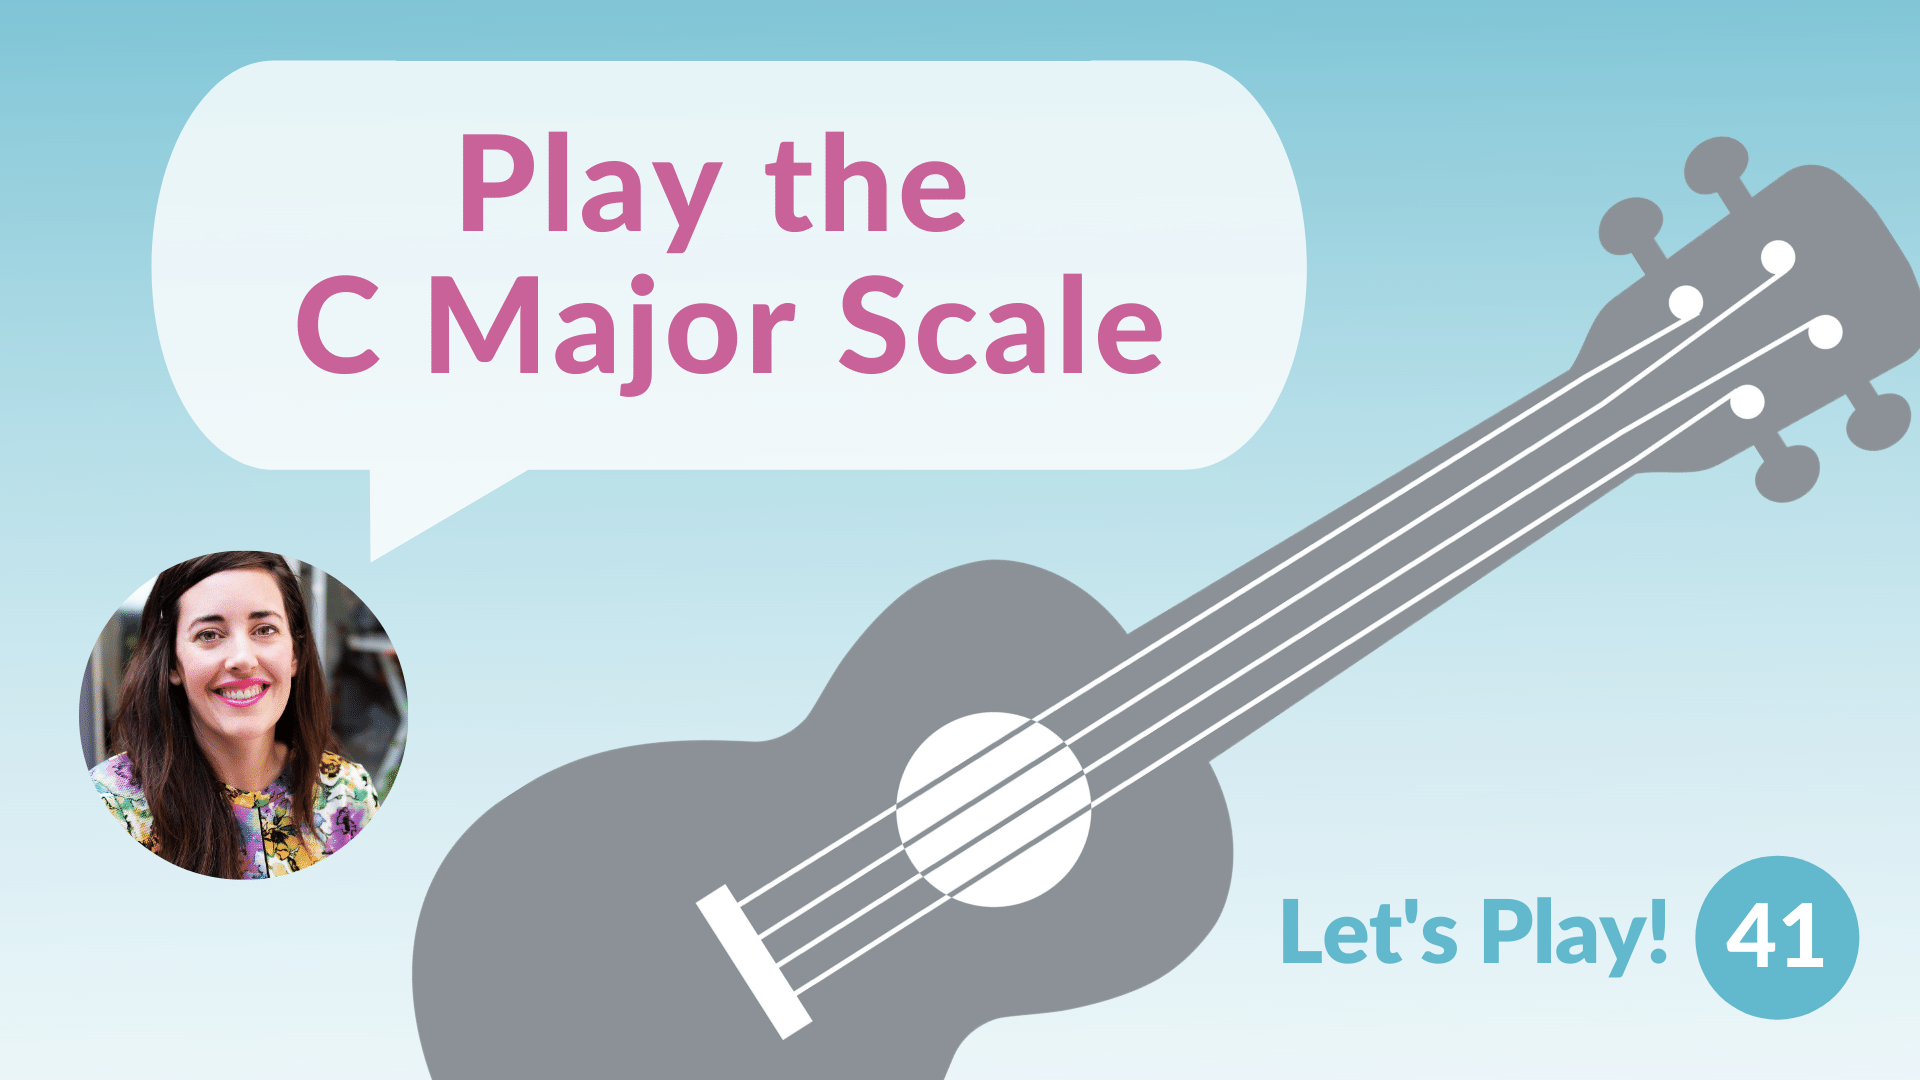 Play the C Major Scale